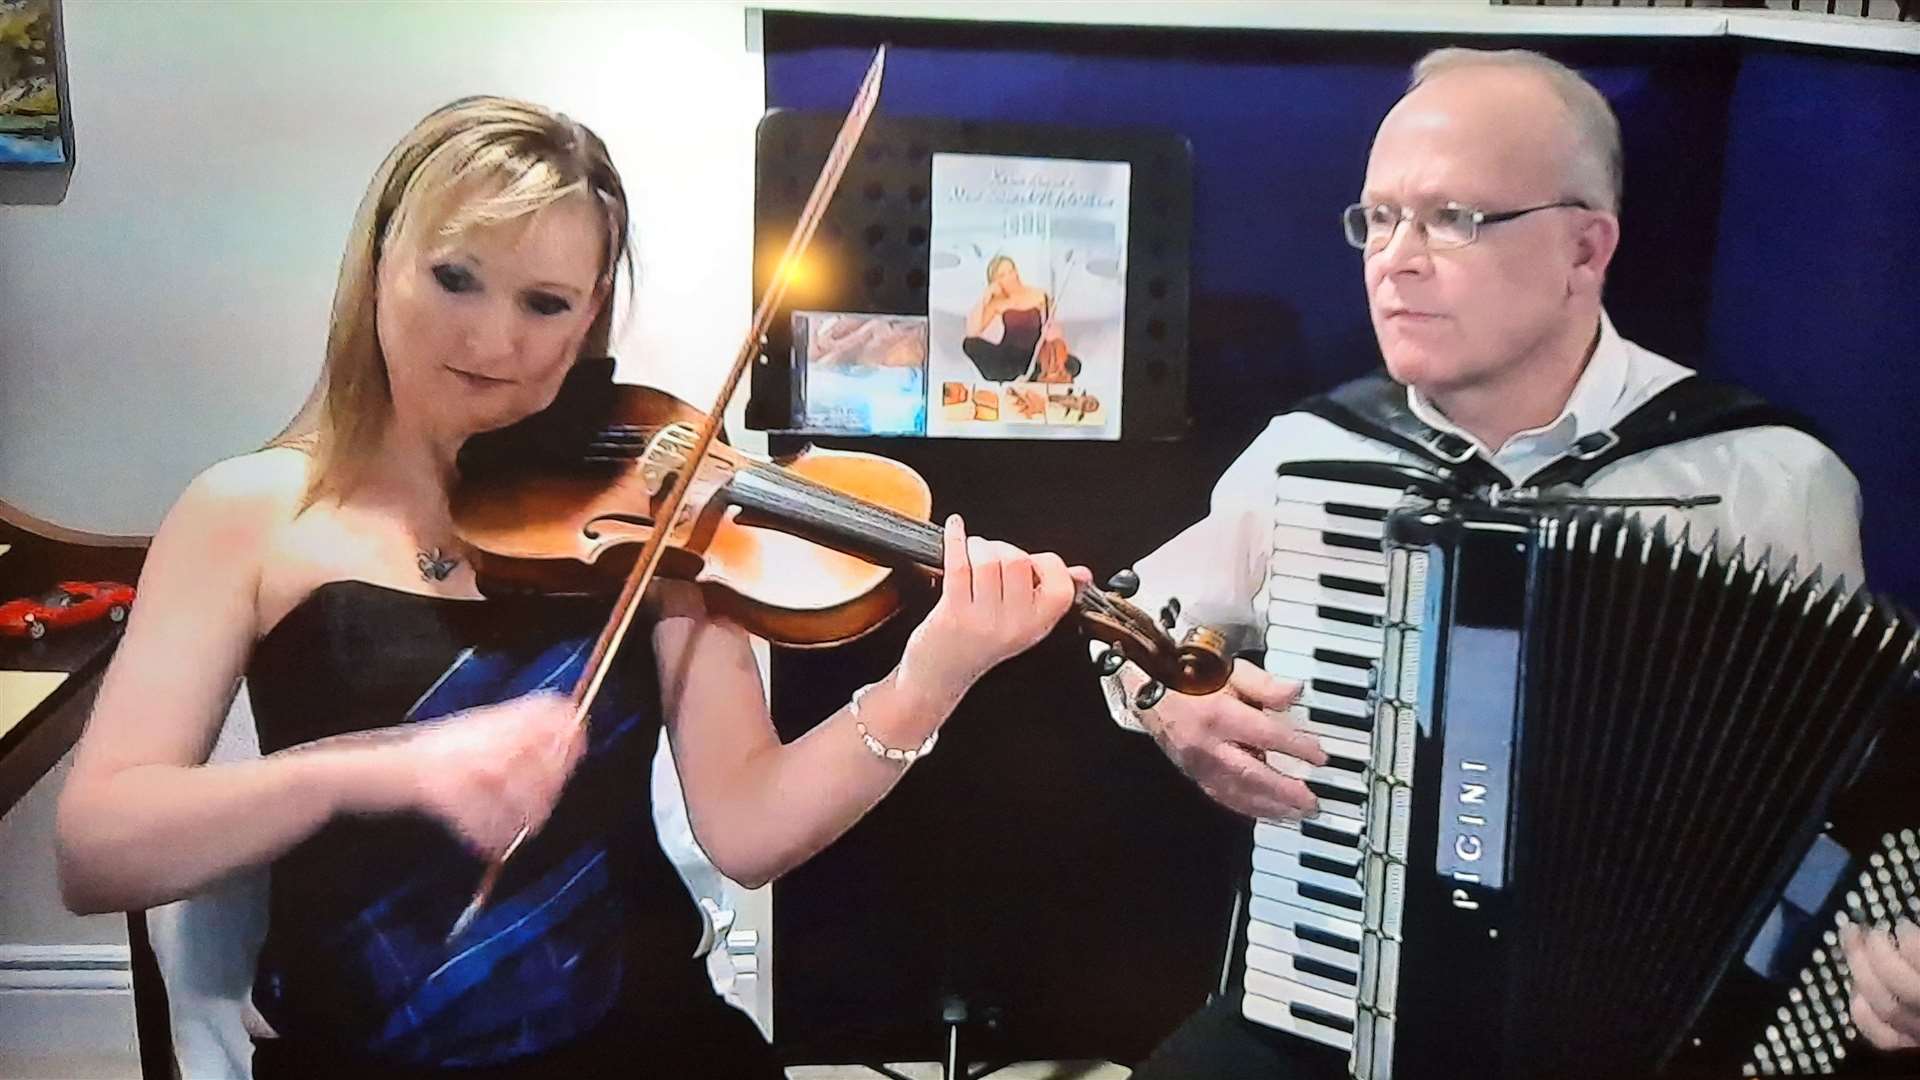 Karen Steven and Alastair MacDonald performing the show from Canada.